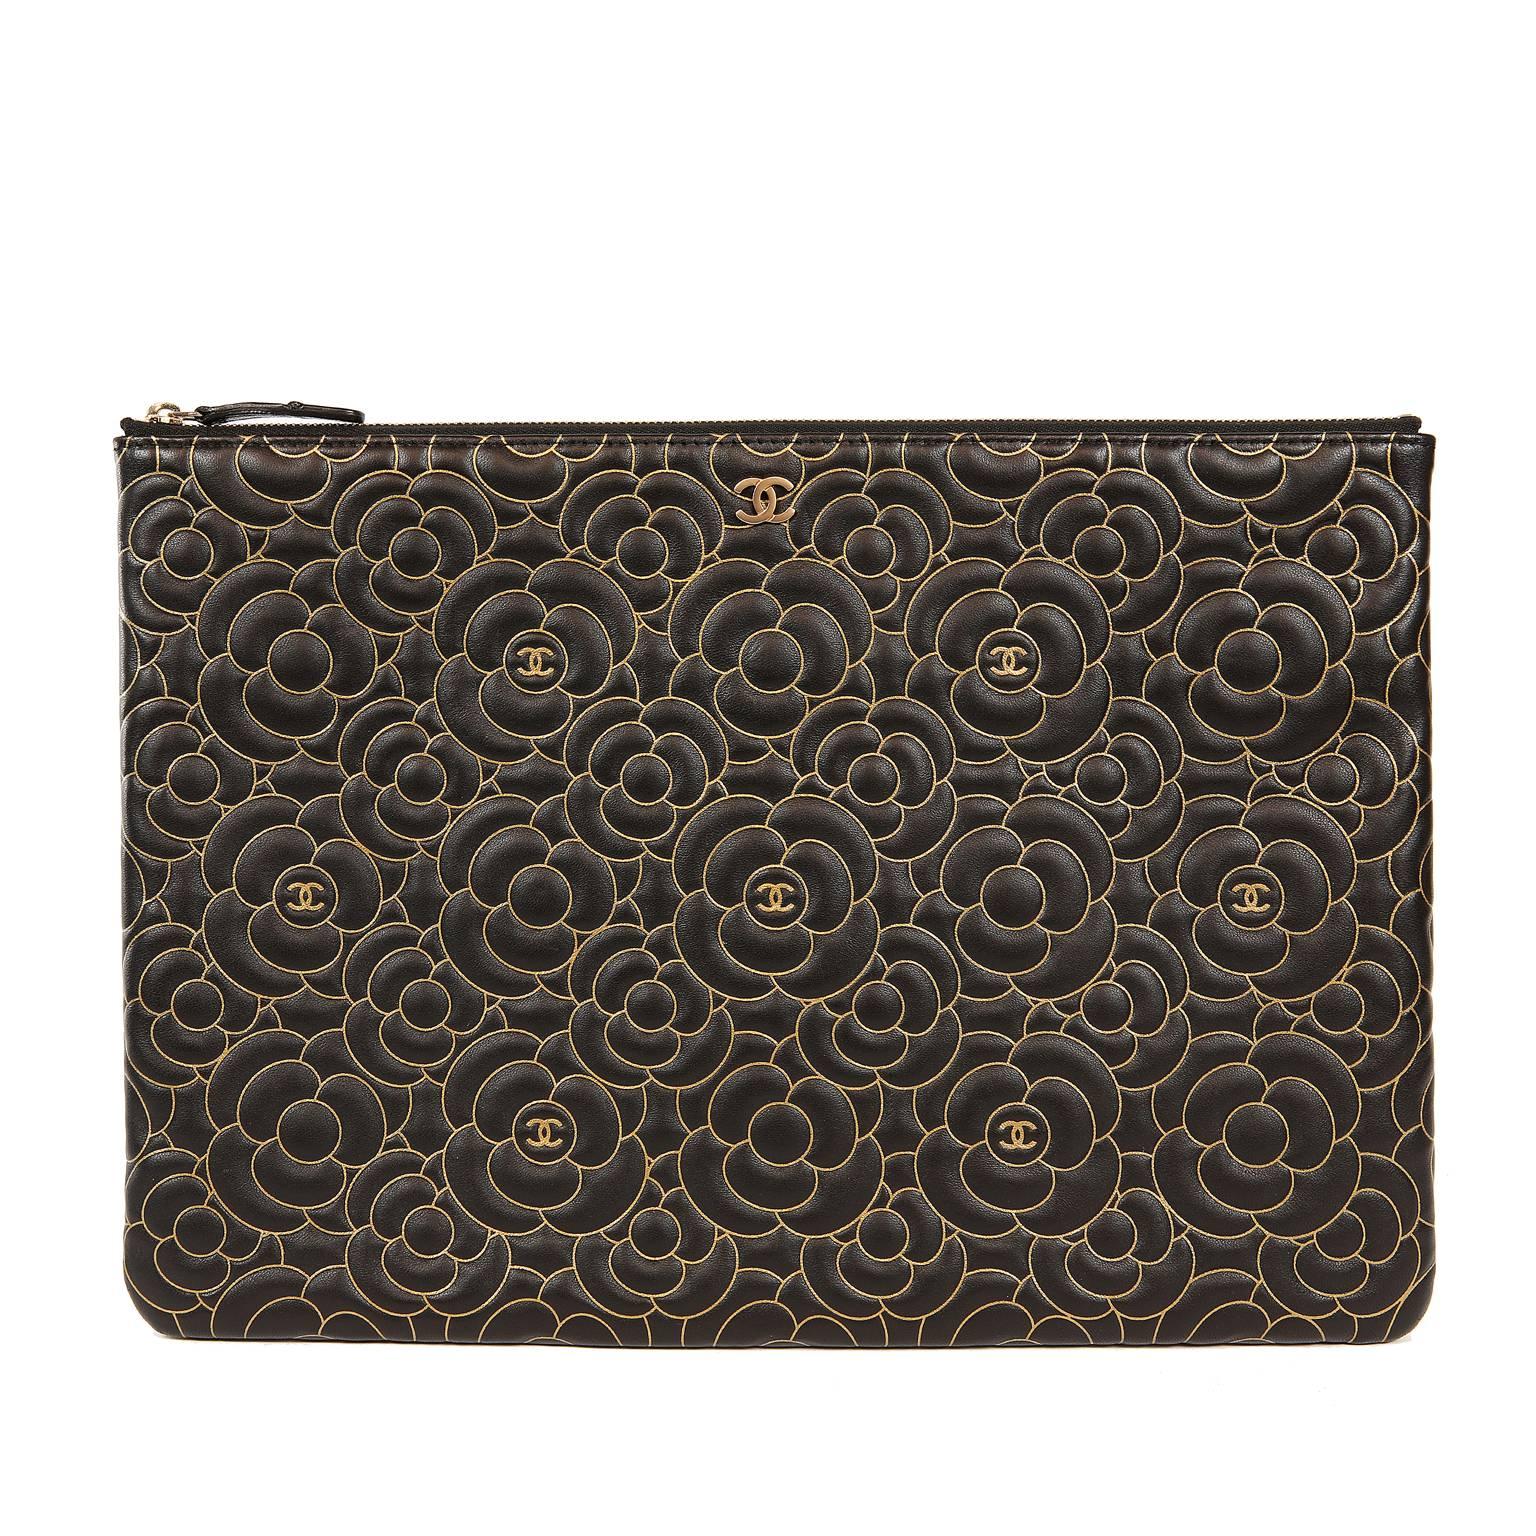 Chanel Black Leather Quilted Camellia Clutch